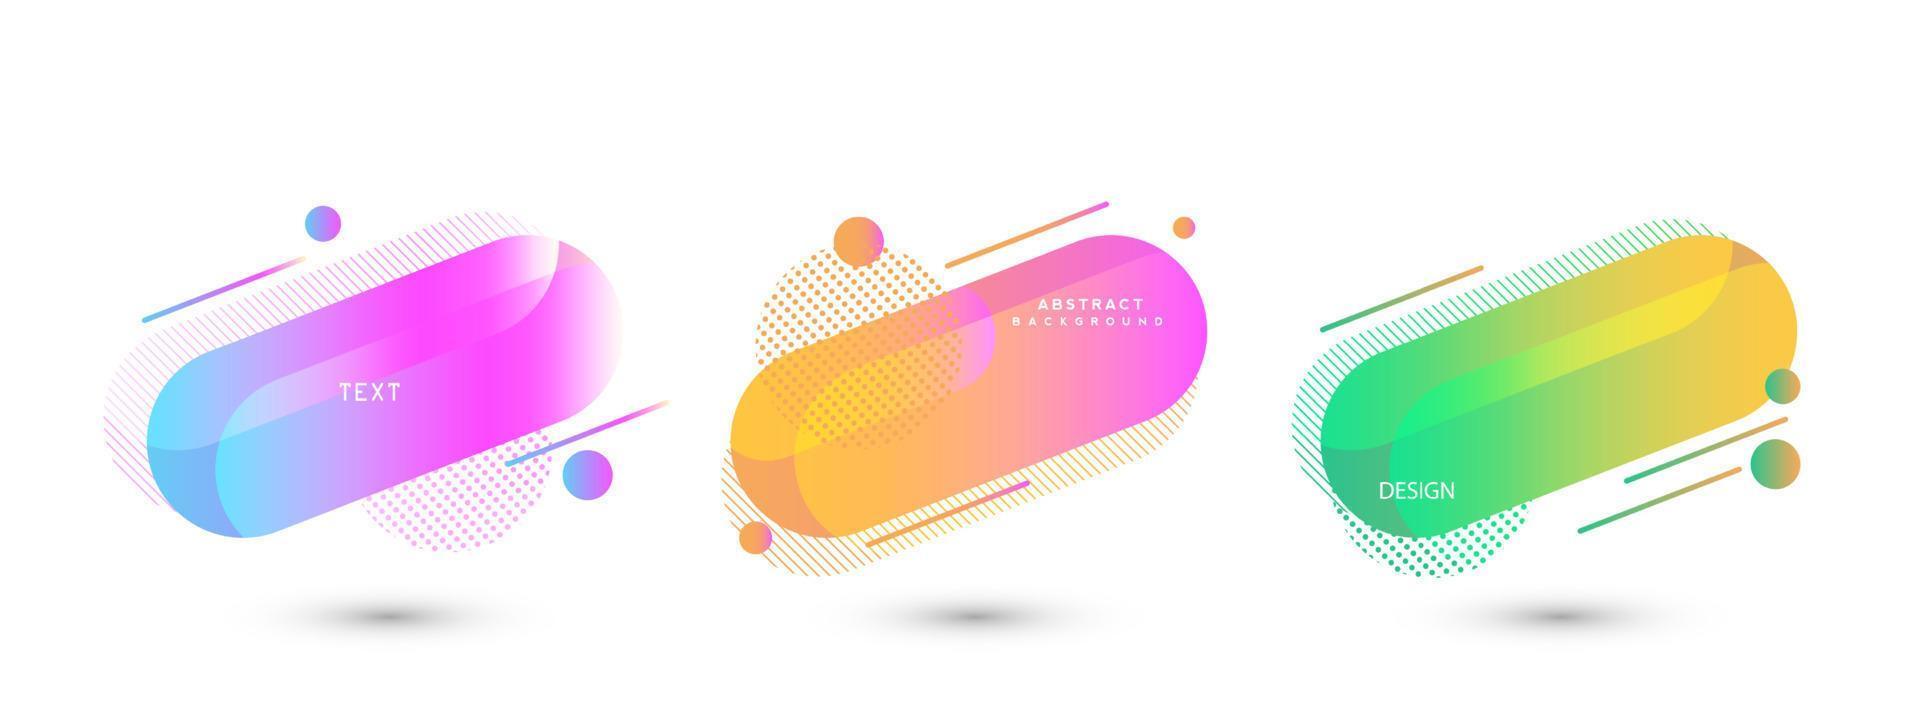 Set of abstract modern graphic elements and line. Gradient abstract banners with shapes EPS10. vector